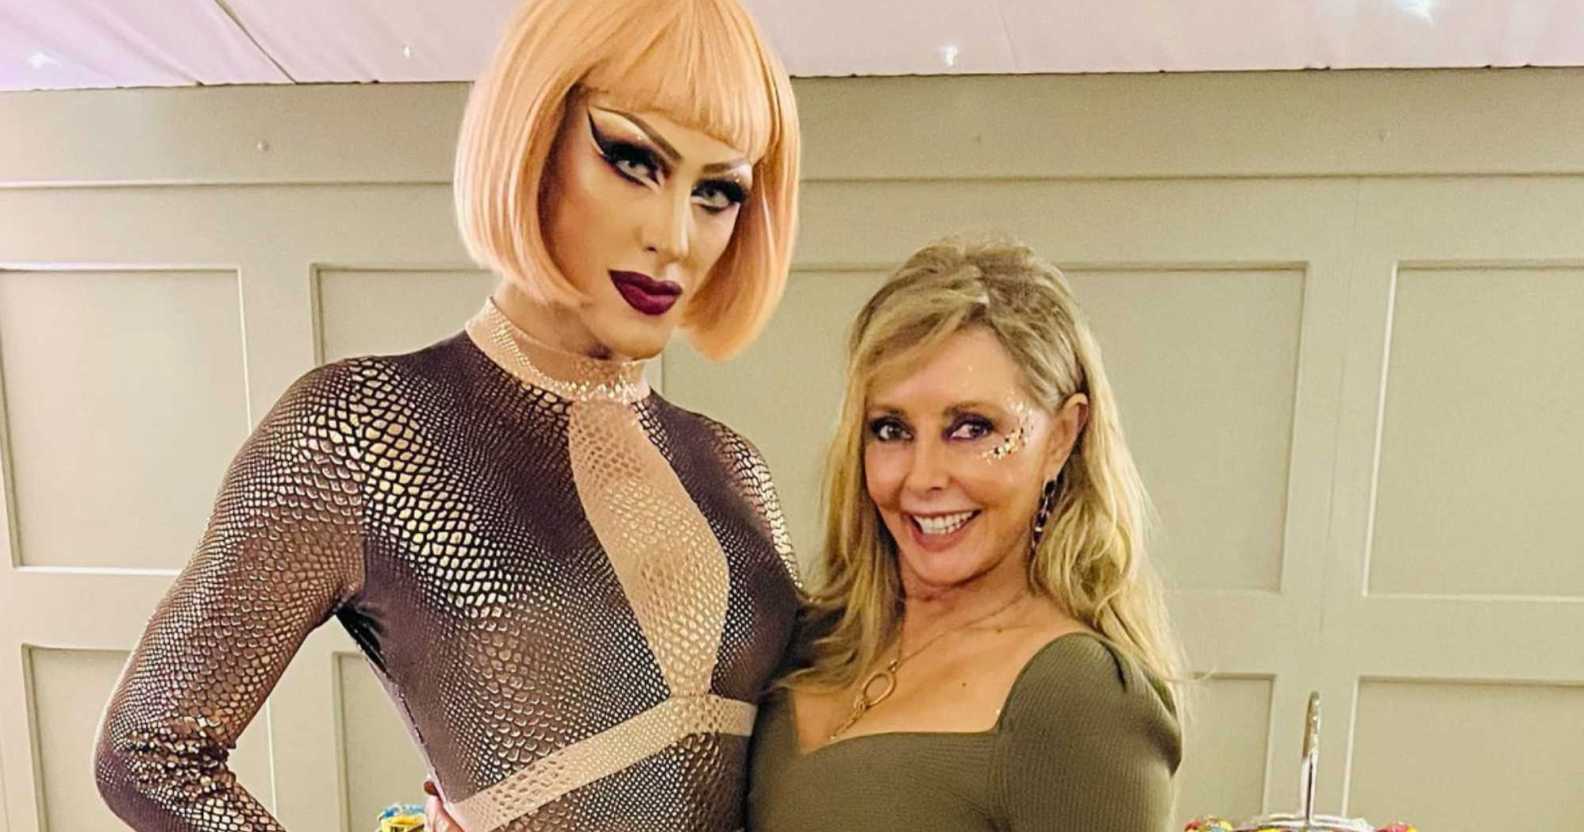 An Instagram photo shows Carol Vorderman wearing a light green dress posing with drag queen who's wearing a silver dress